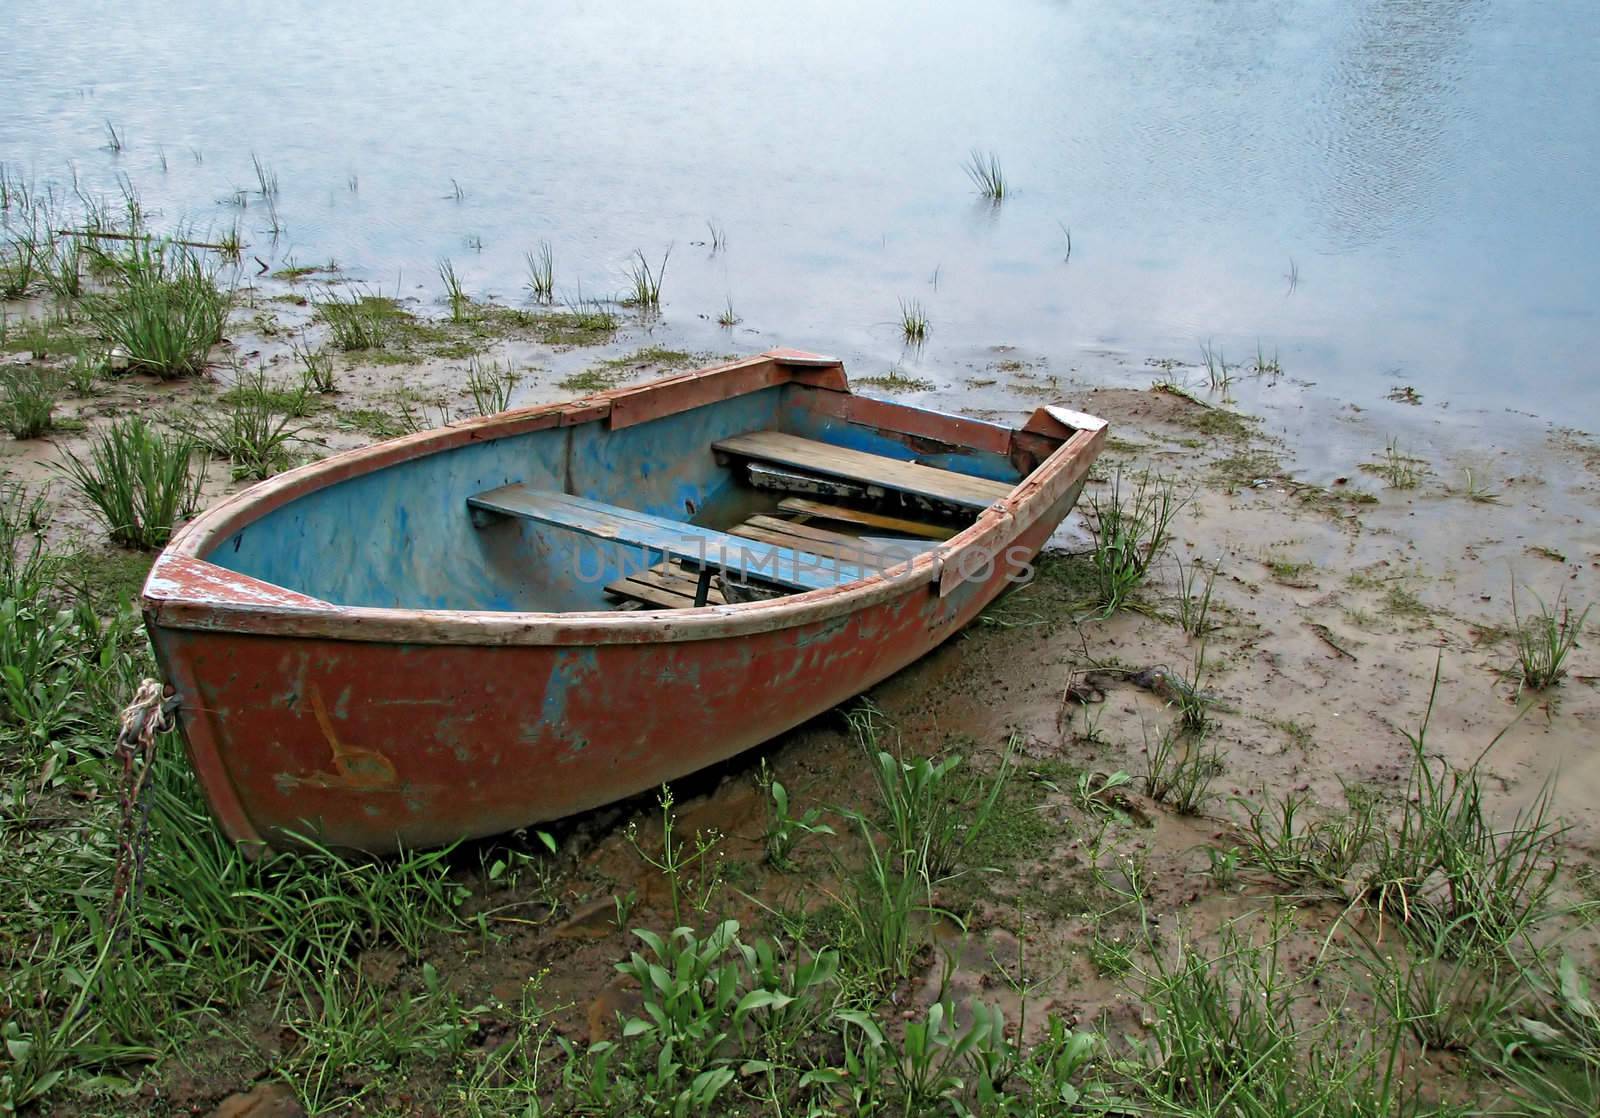 An abandoned boat on a bank of a river